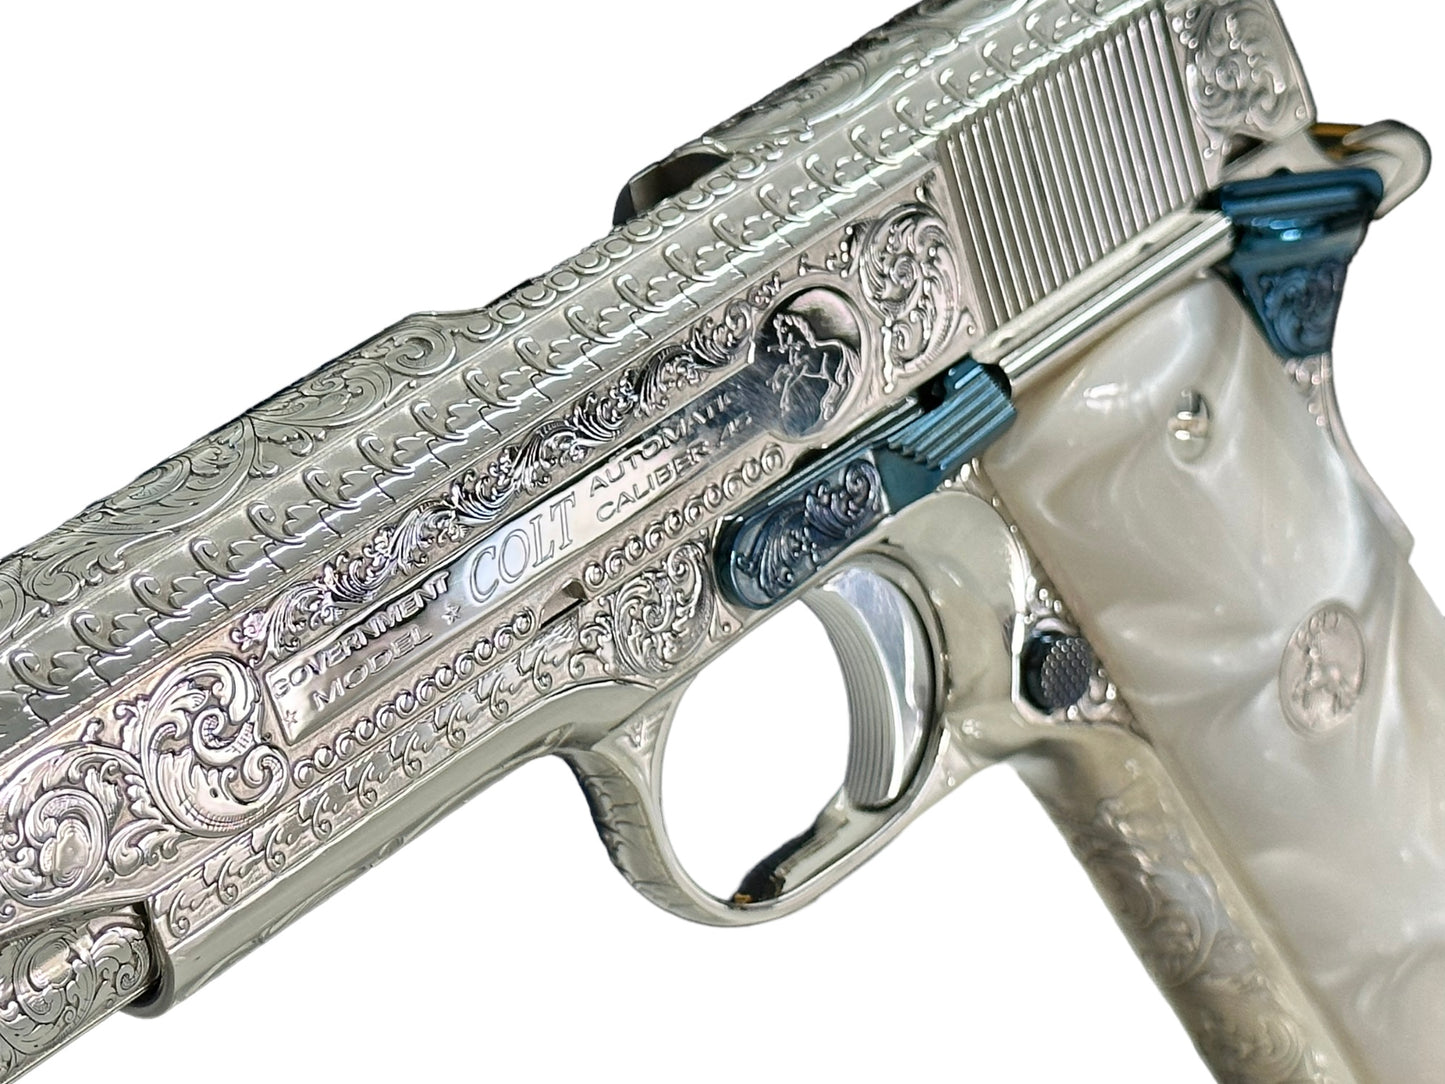 COLT CUSTOM 1911 HIGH POLISHED AND NICKEL PLATED WITH NITRO BLUE ACCENTS FULLY ENGRAVED .45acp